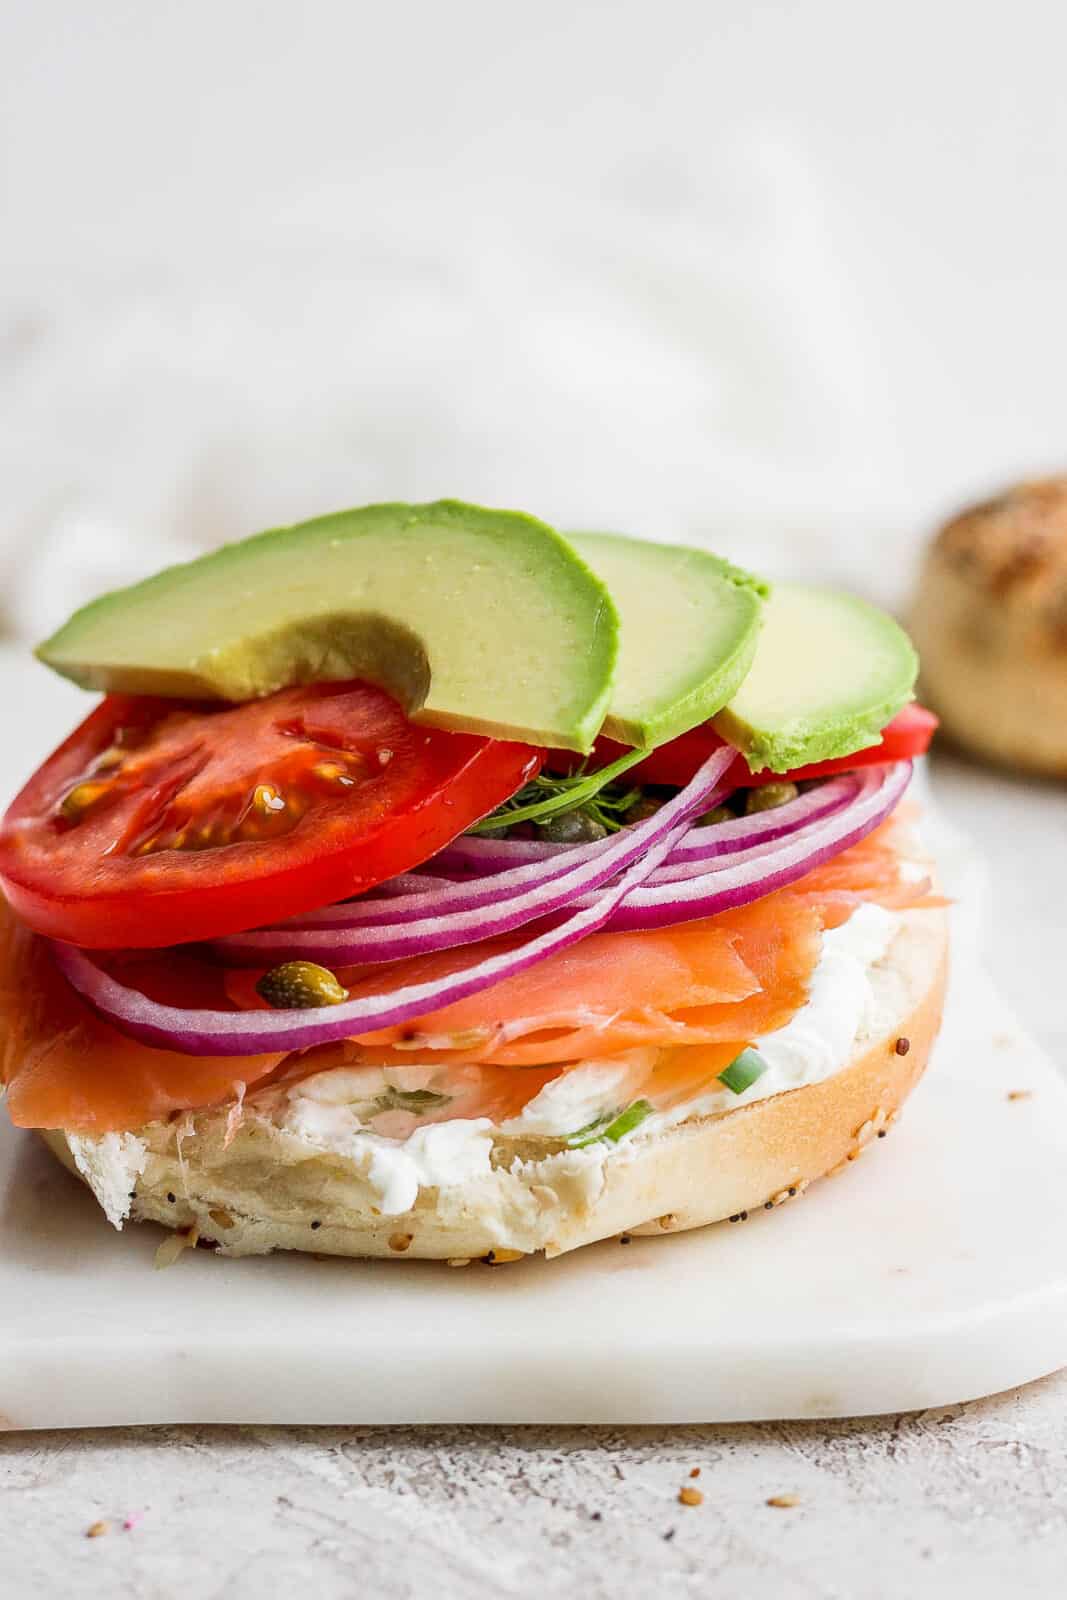 A lox bagel with tomato and avocado slices added on top.